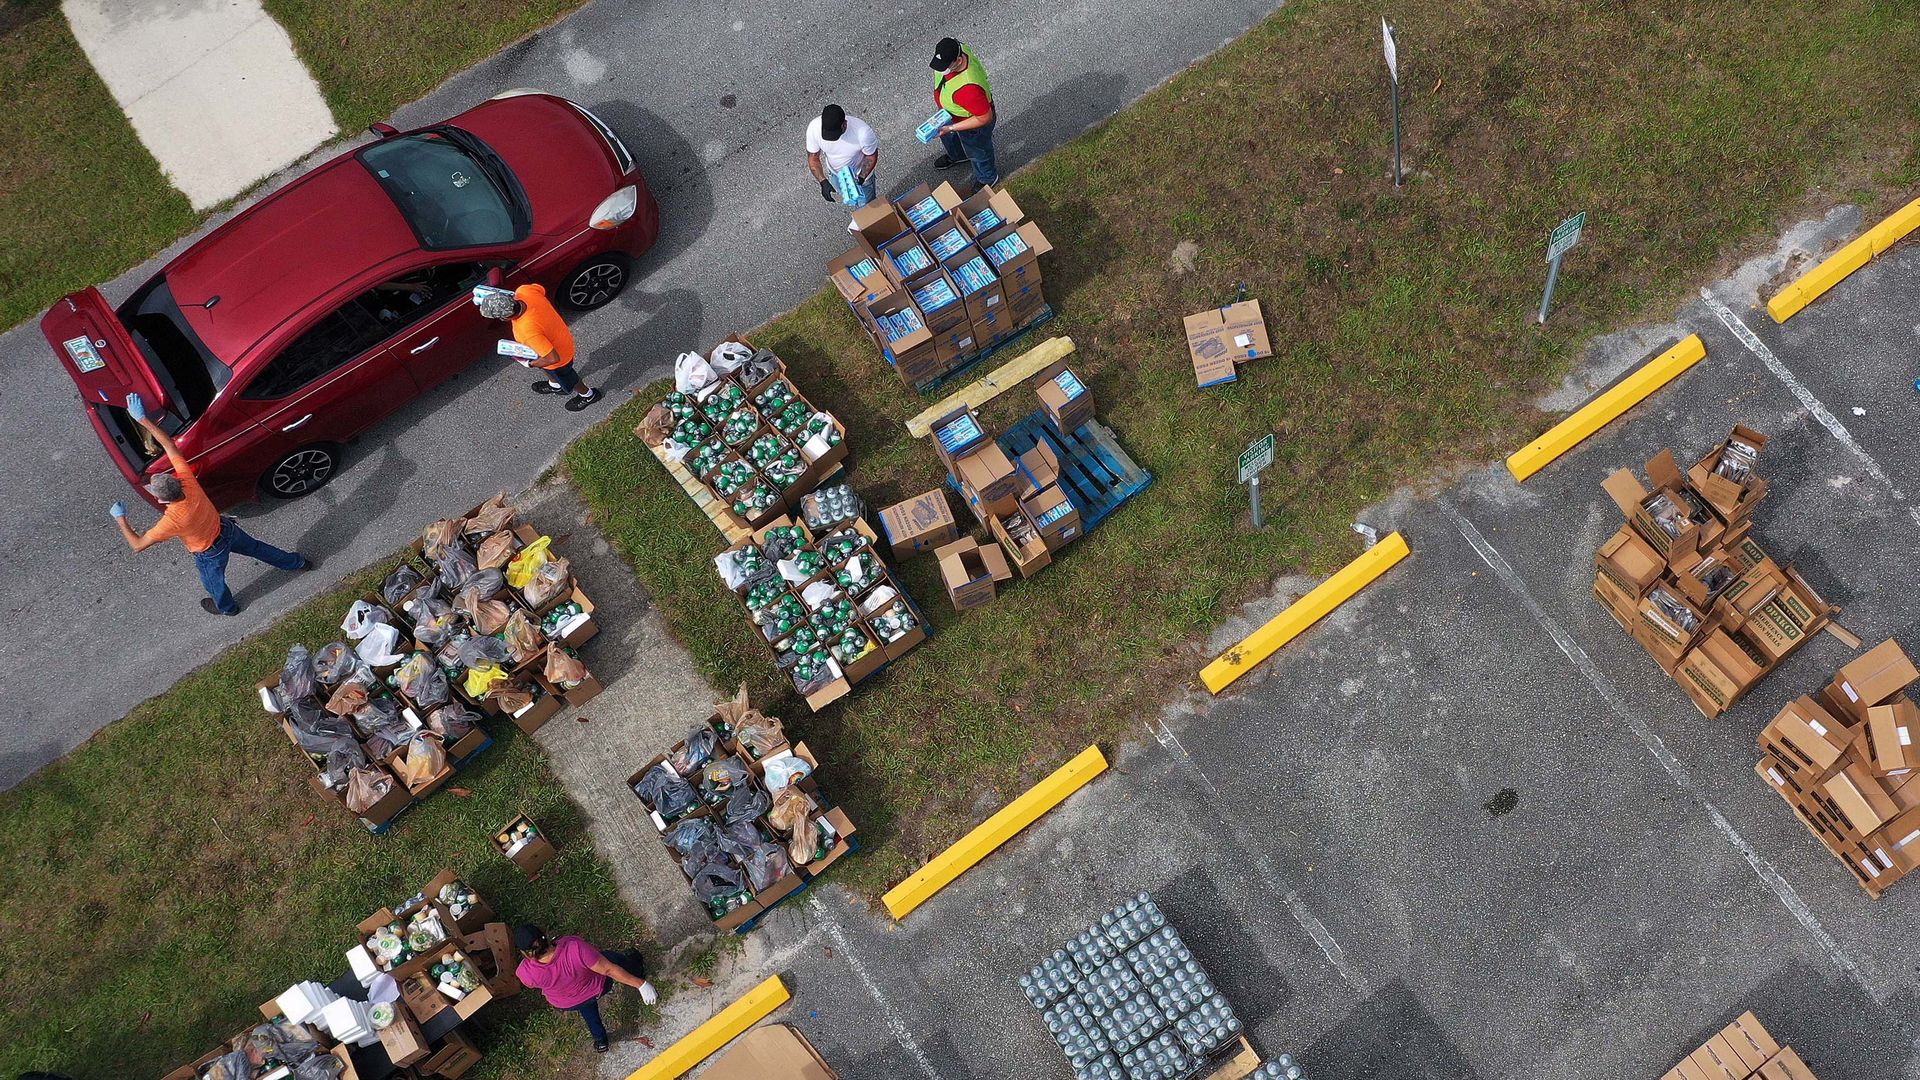 Volunteers distribute food from the Second Harvest Food Bank of Central Florida.